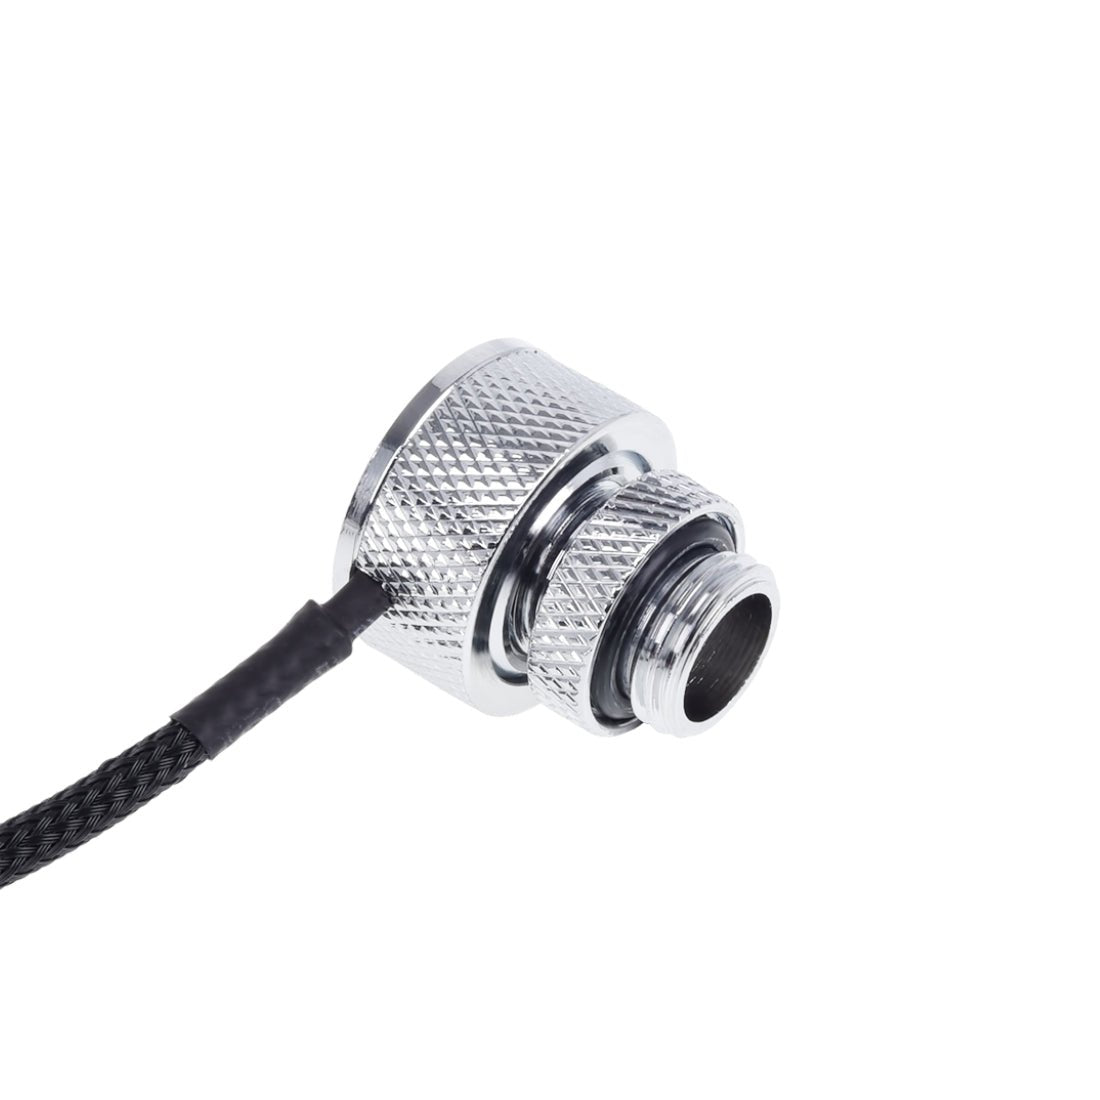 Alphacool Eiszapfen temperature sensor G1/4 IG/IG with AG adapter - Chrome - Store 974 | ستور ٩٧٤